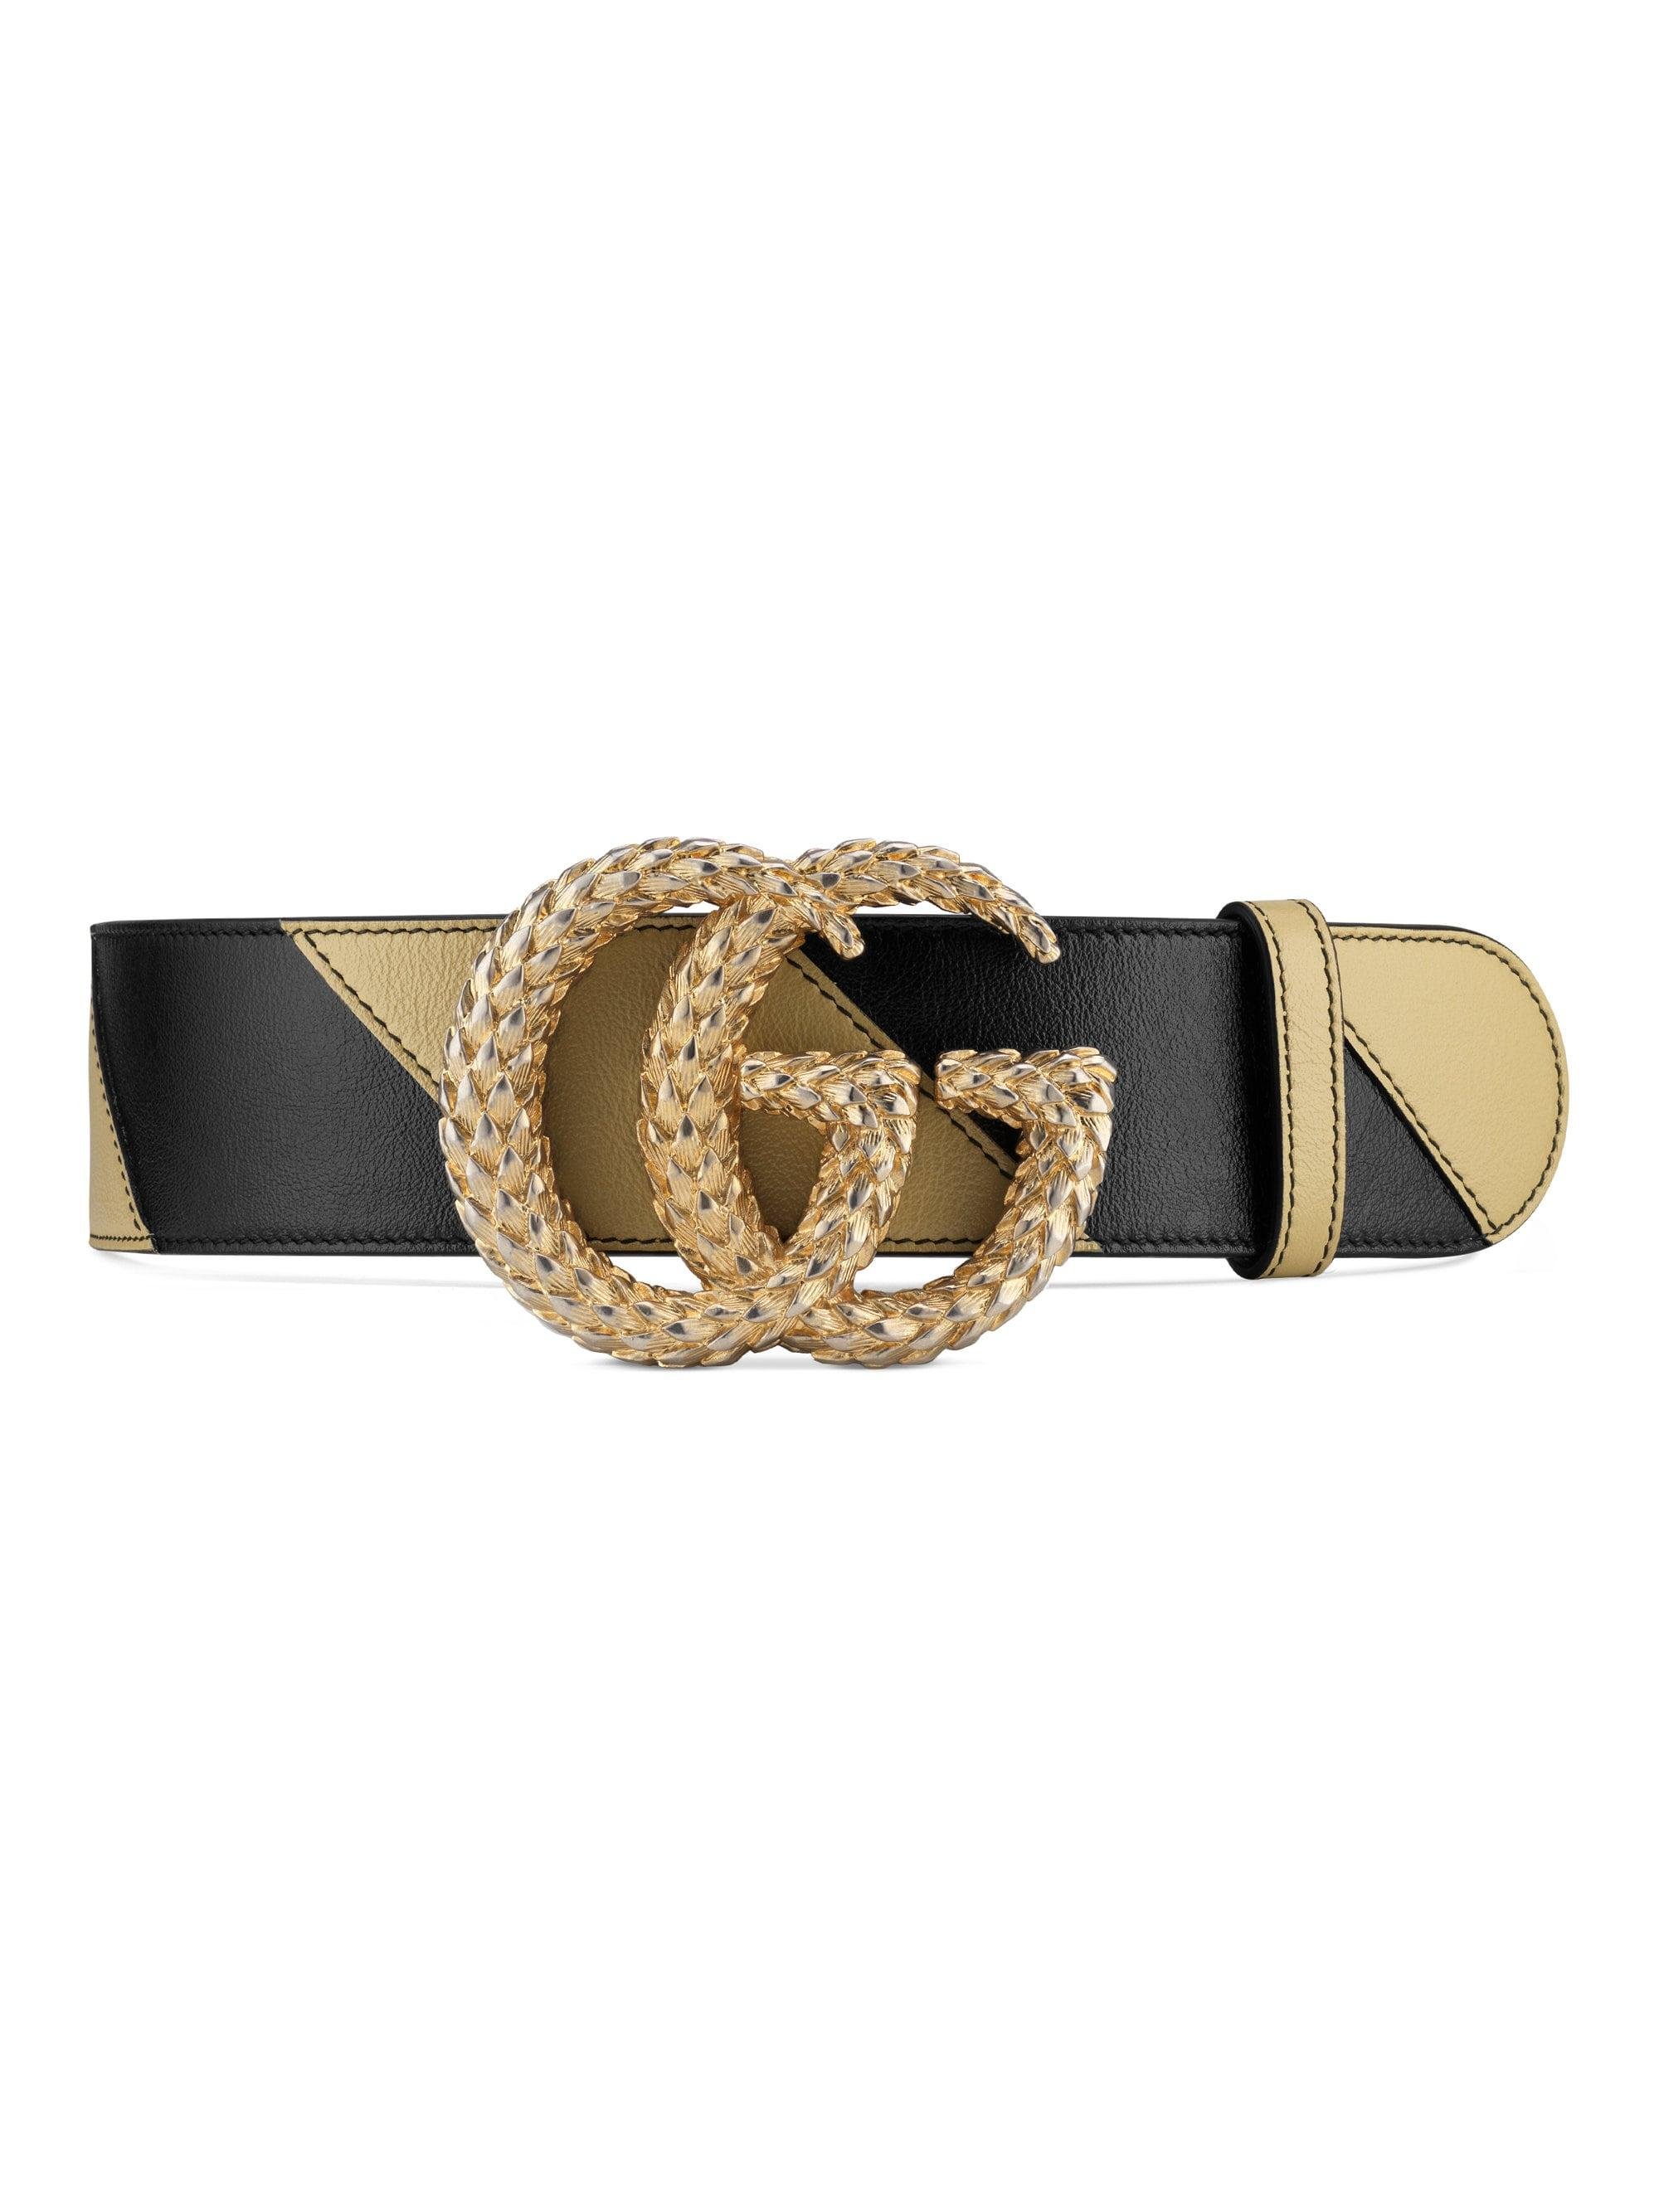  Gucci  Women s  Wide GG Marmont  Striped Leather Belt  Black 